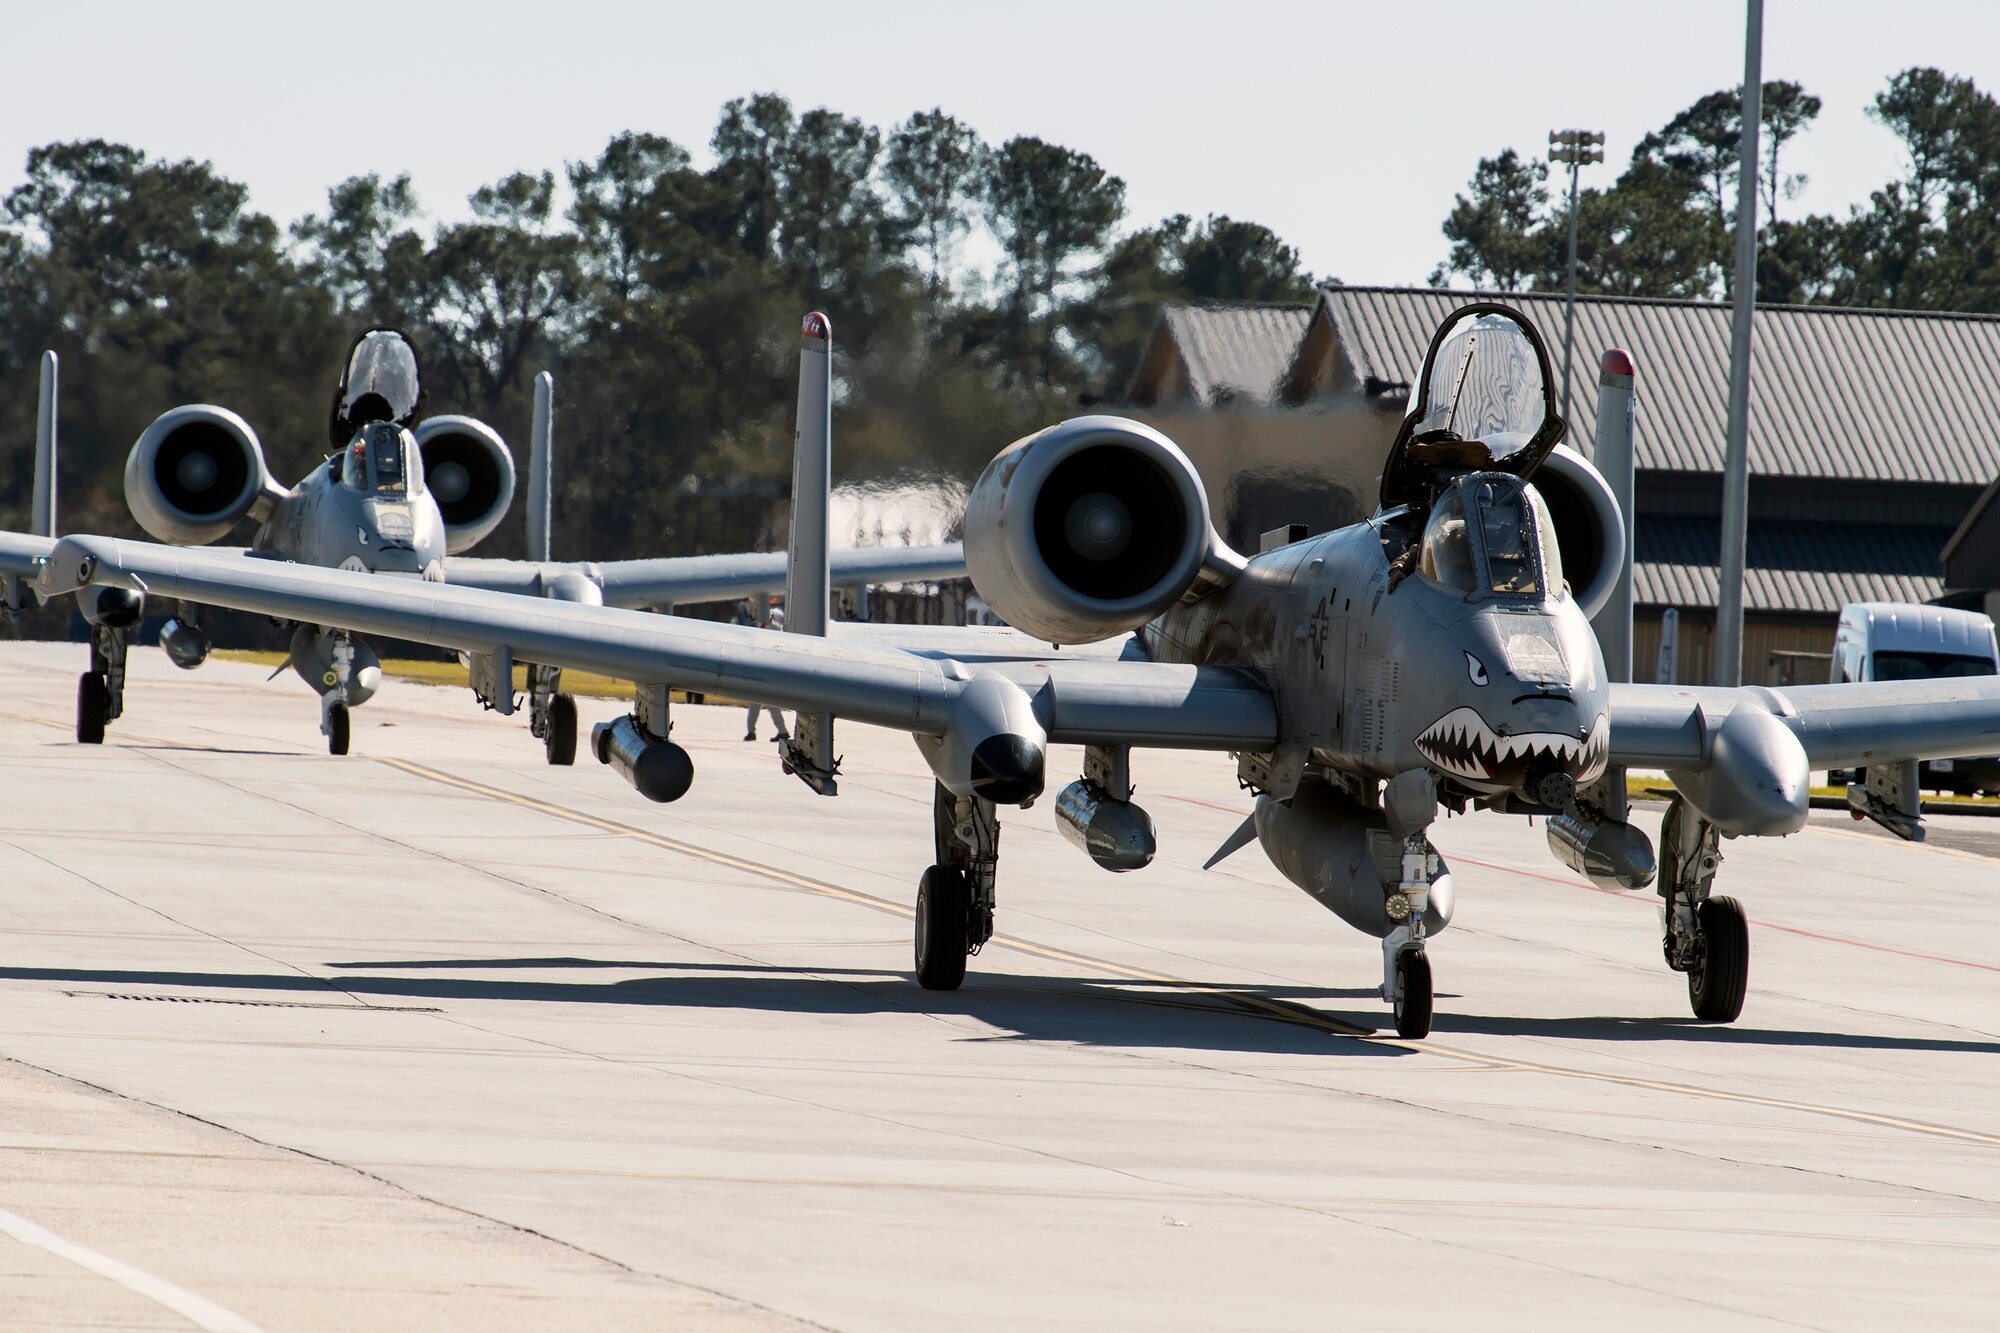 Airmen and aircraft from the 75th Fighter Squadron at Moody Air Force Base, Ga., return from supporting Operation Freedom’s Sentinel, Jan. 25, 2019. The A-10C Thunderbolt II, which has an increased loiter time and weapons capabilities, deployed to southwest Asia in support of ground forces. (U.S. Air Force photo By Airman First Class Eugene Oliver)